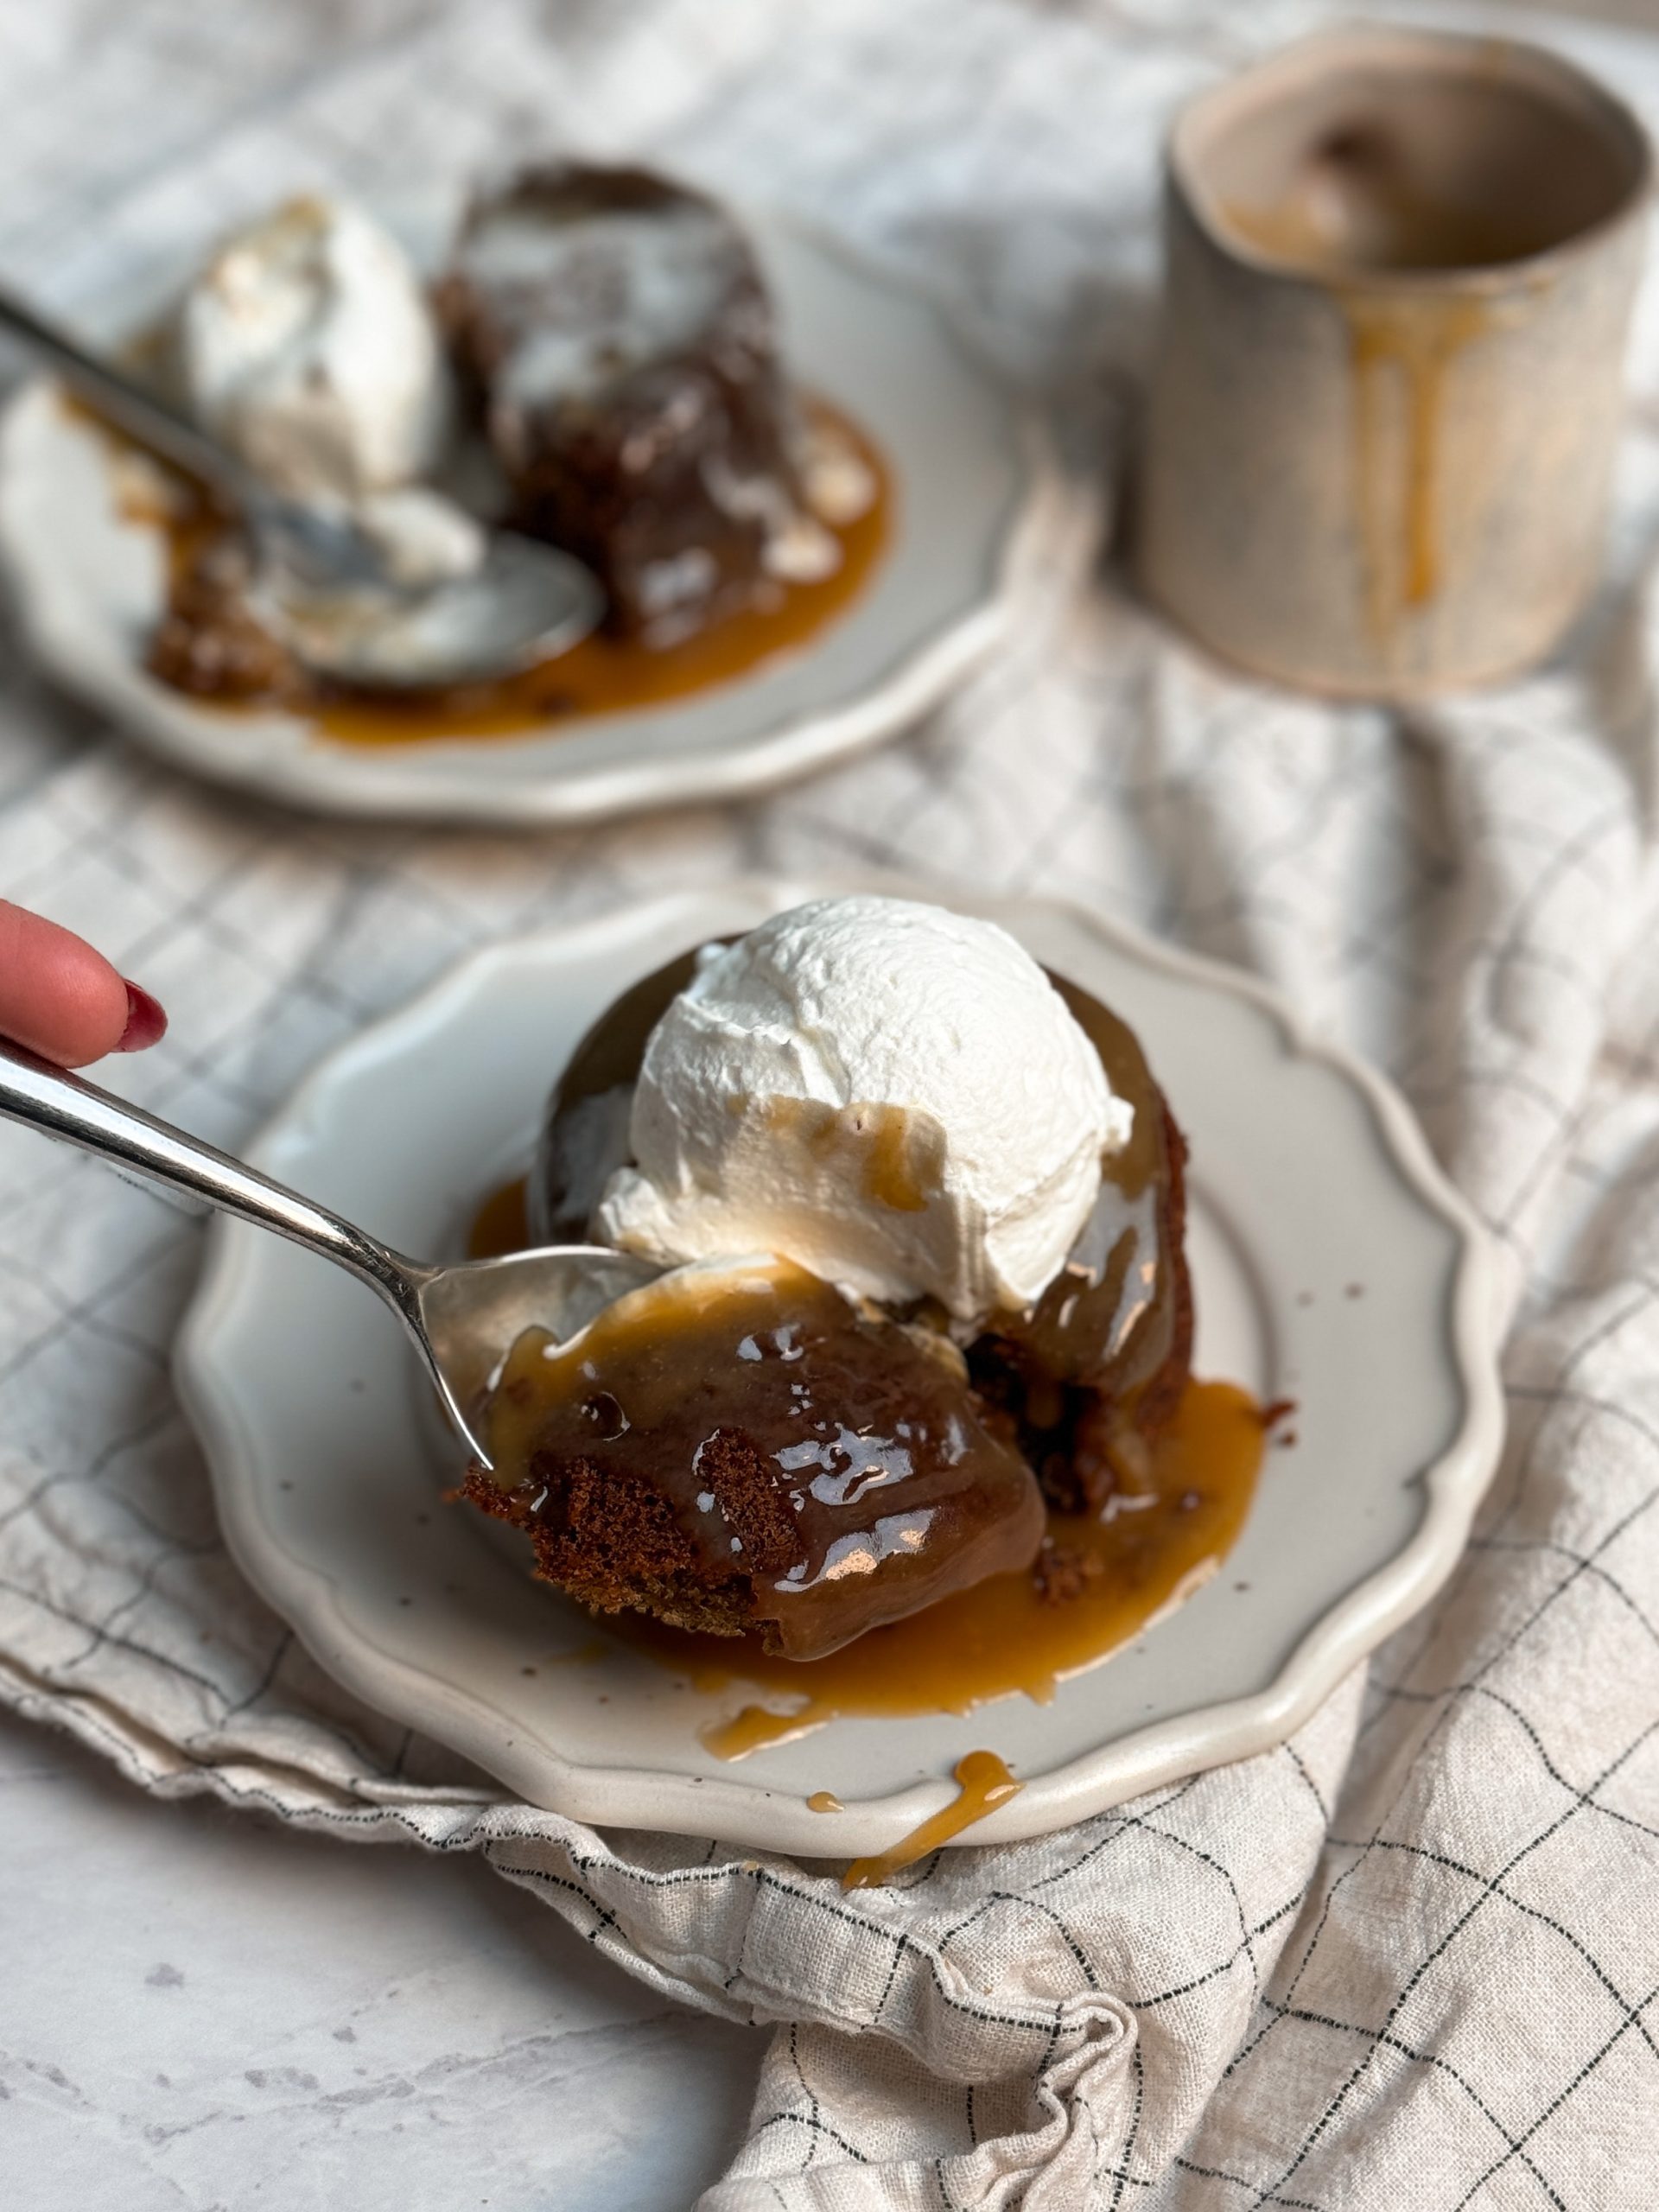 Small dessert place with a single serve sticky toffee pudding cake with toffee sauce and a scoop of cream on it. spoon is taking out a bite revealing soft and moist texture